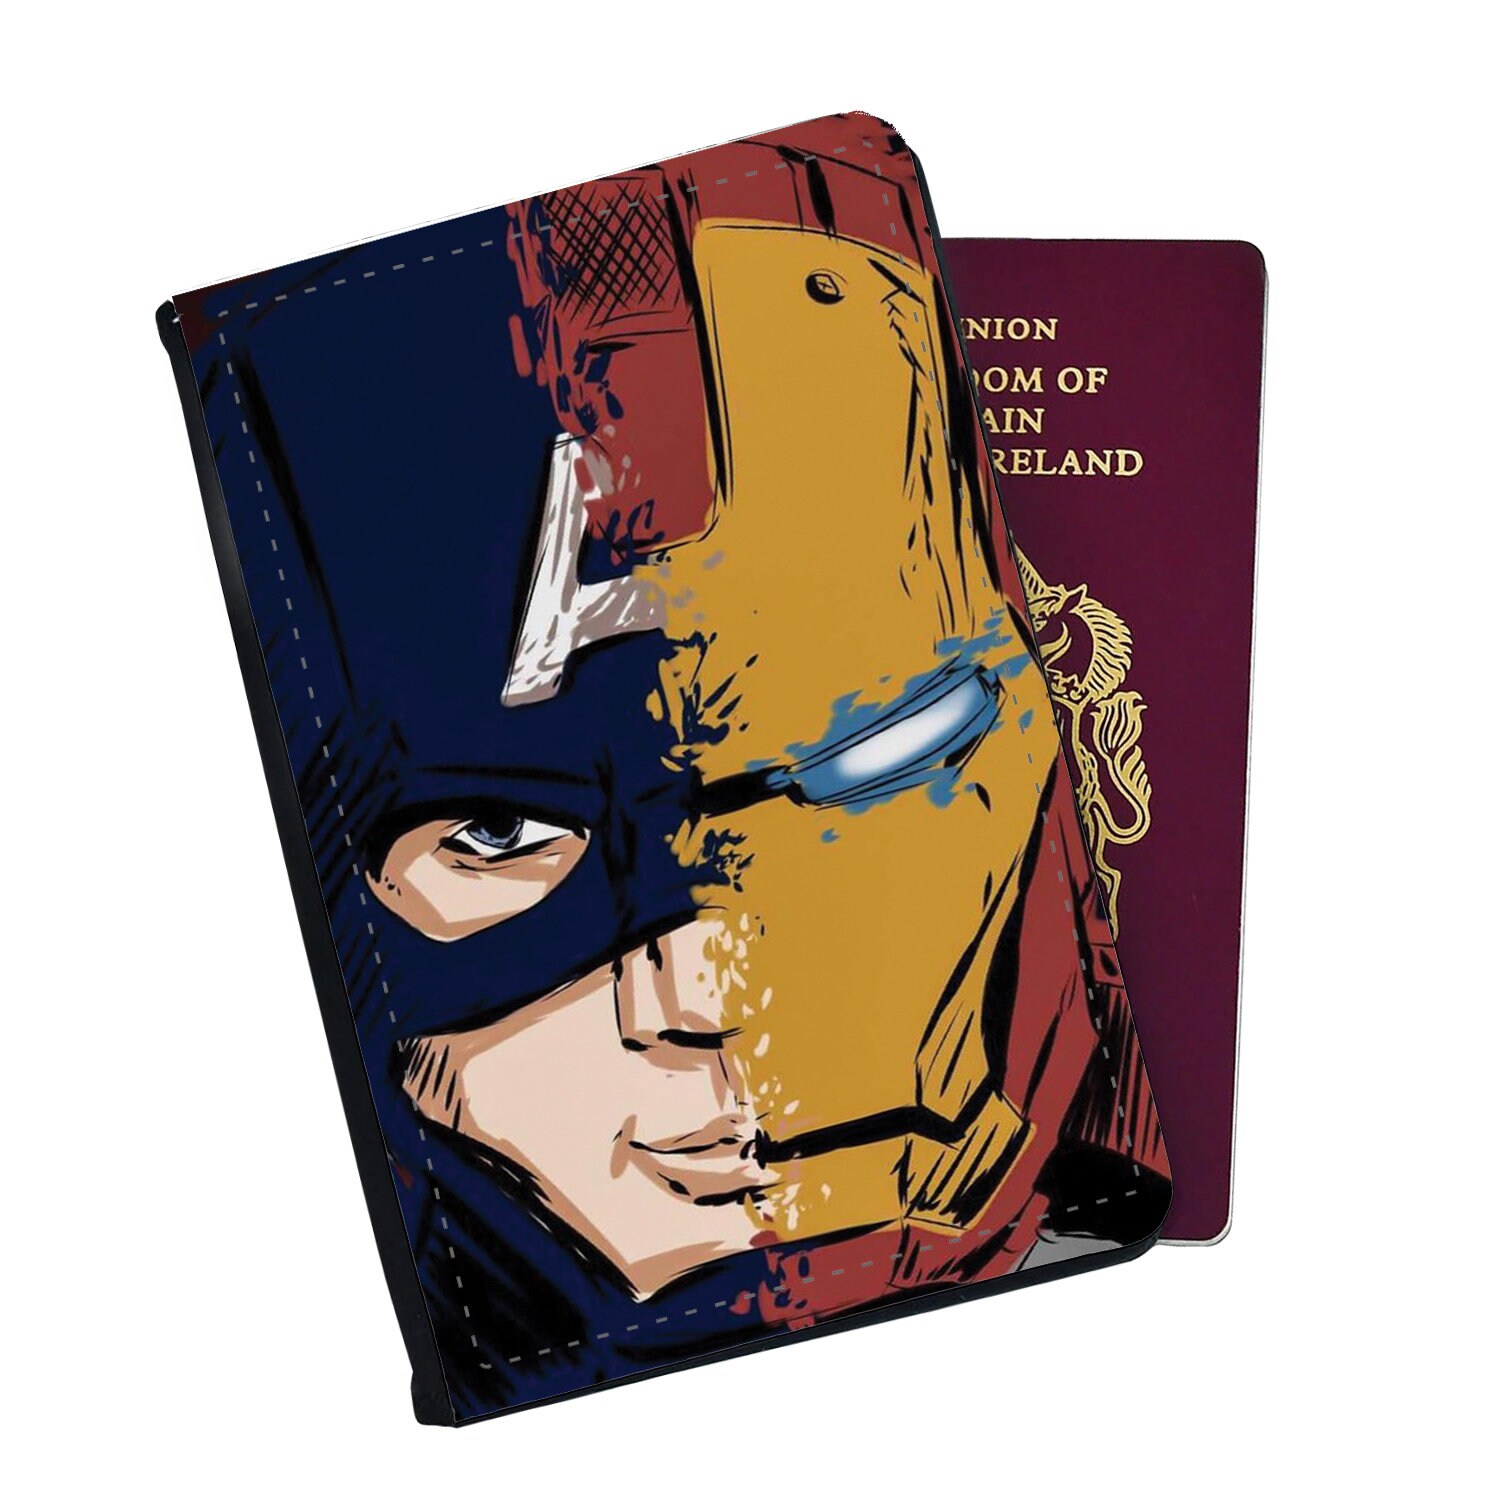 Personalised Faux Leather Passport Cover & Luggage Tag Marvel Avengers Captain America Ironman Spiderman Hulk Thor Endgame Infinity War